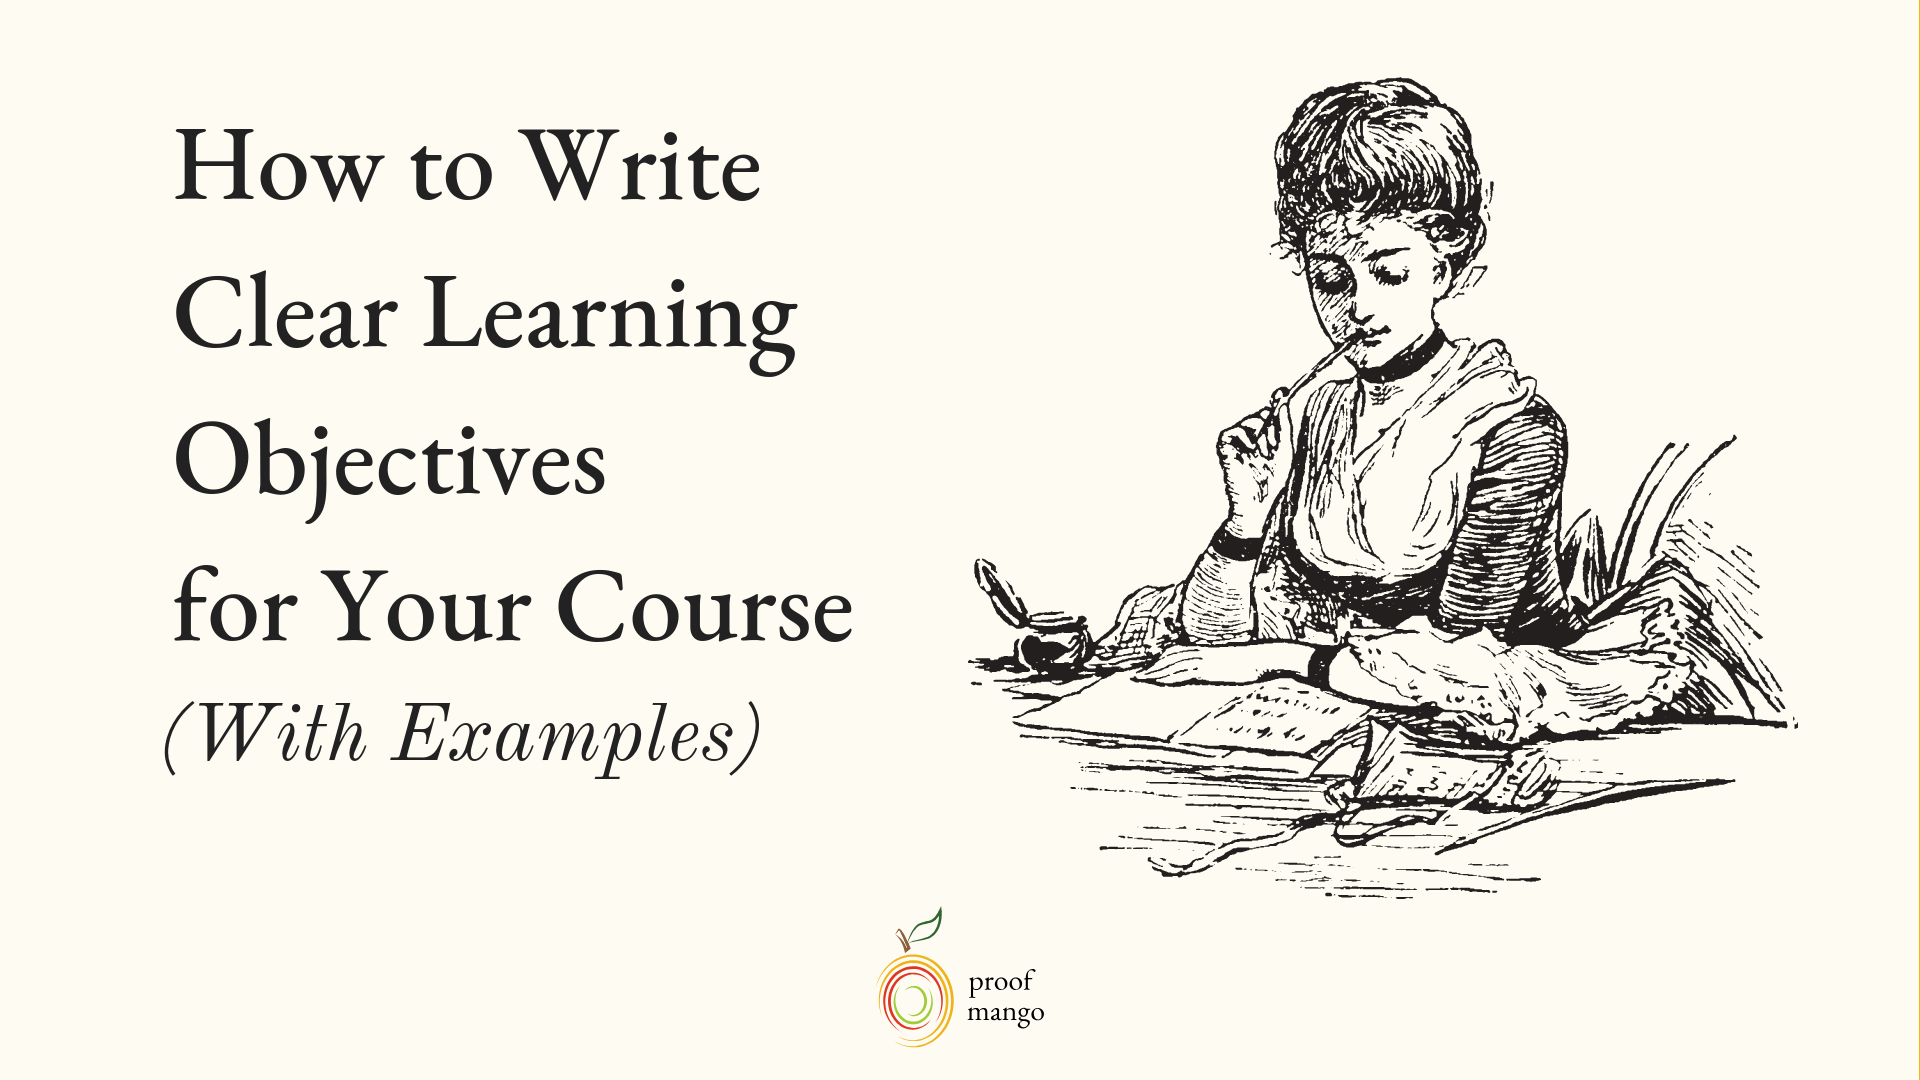 How to Write Clear Learning Objectives for Your Course (With Examples)